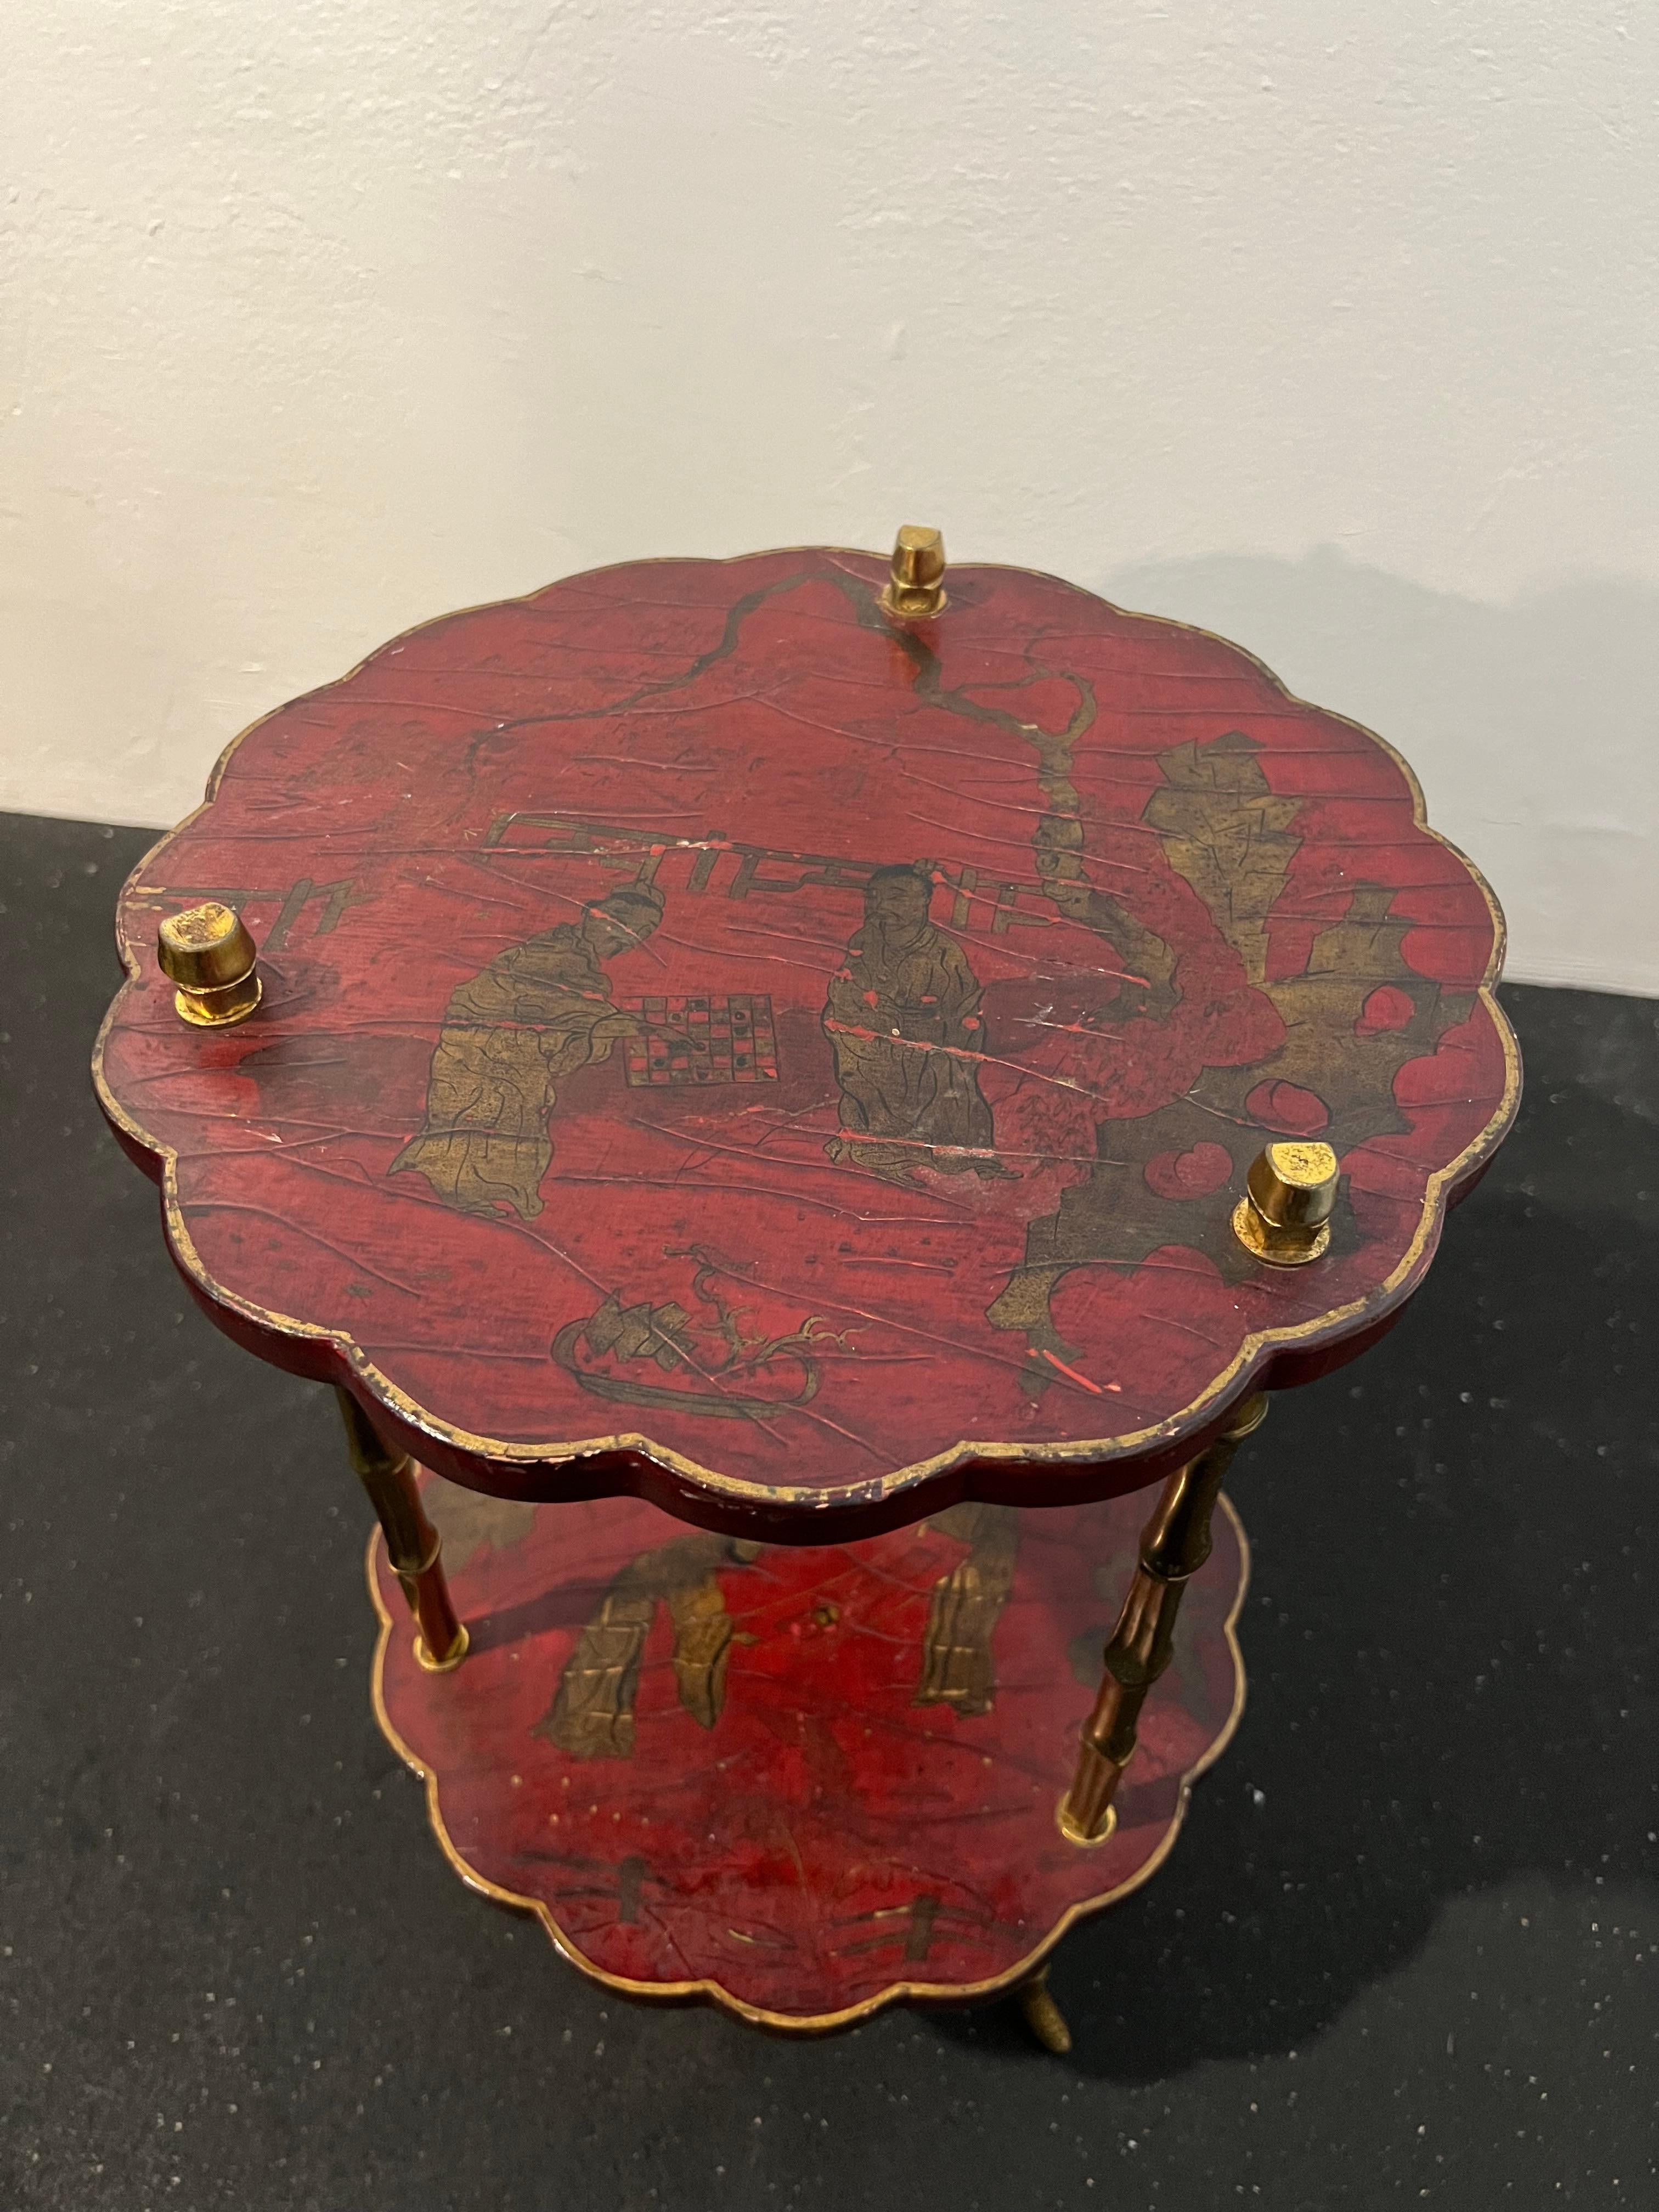 Maison Baguès attributed faux bamboo chinoiserie table in bronze. Finished in Chinese lacquer and decorated with characters, landscapes and pagodas. Please refer to photos for condition (additional photos available upon request).

Would work well in